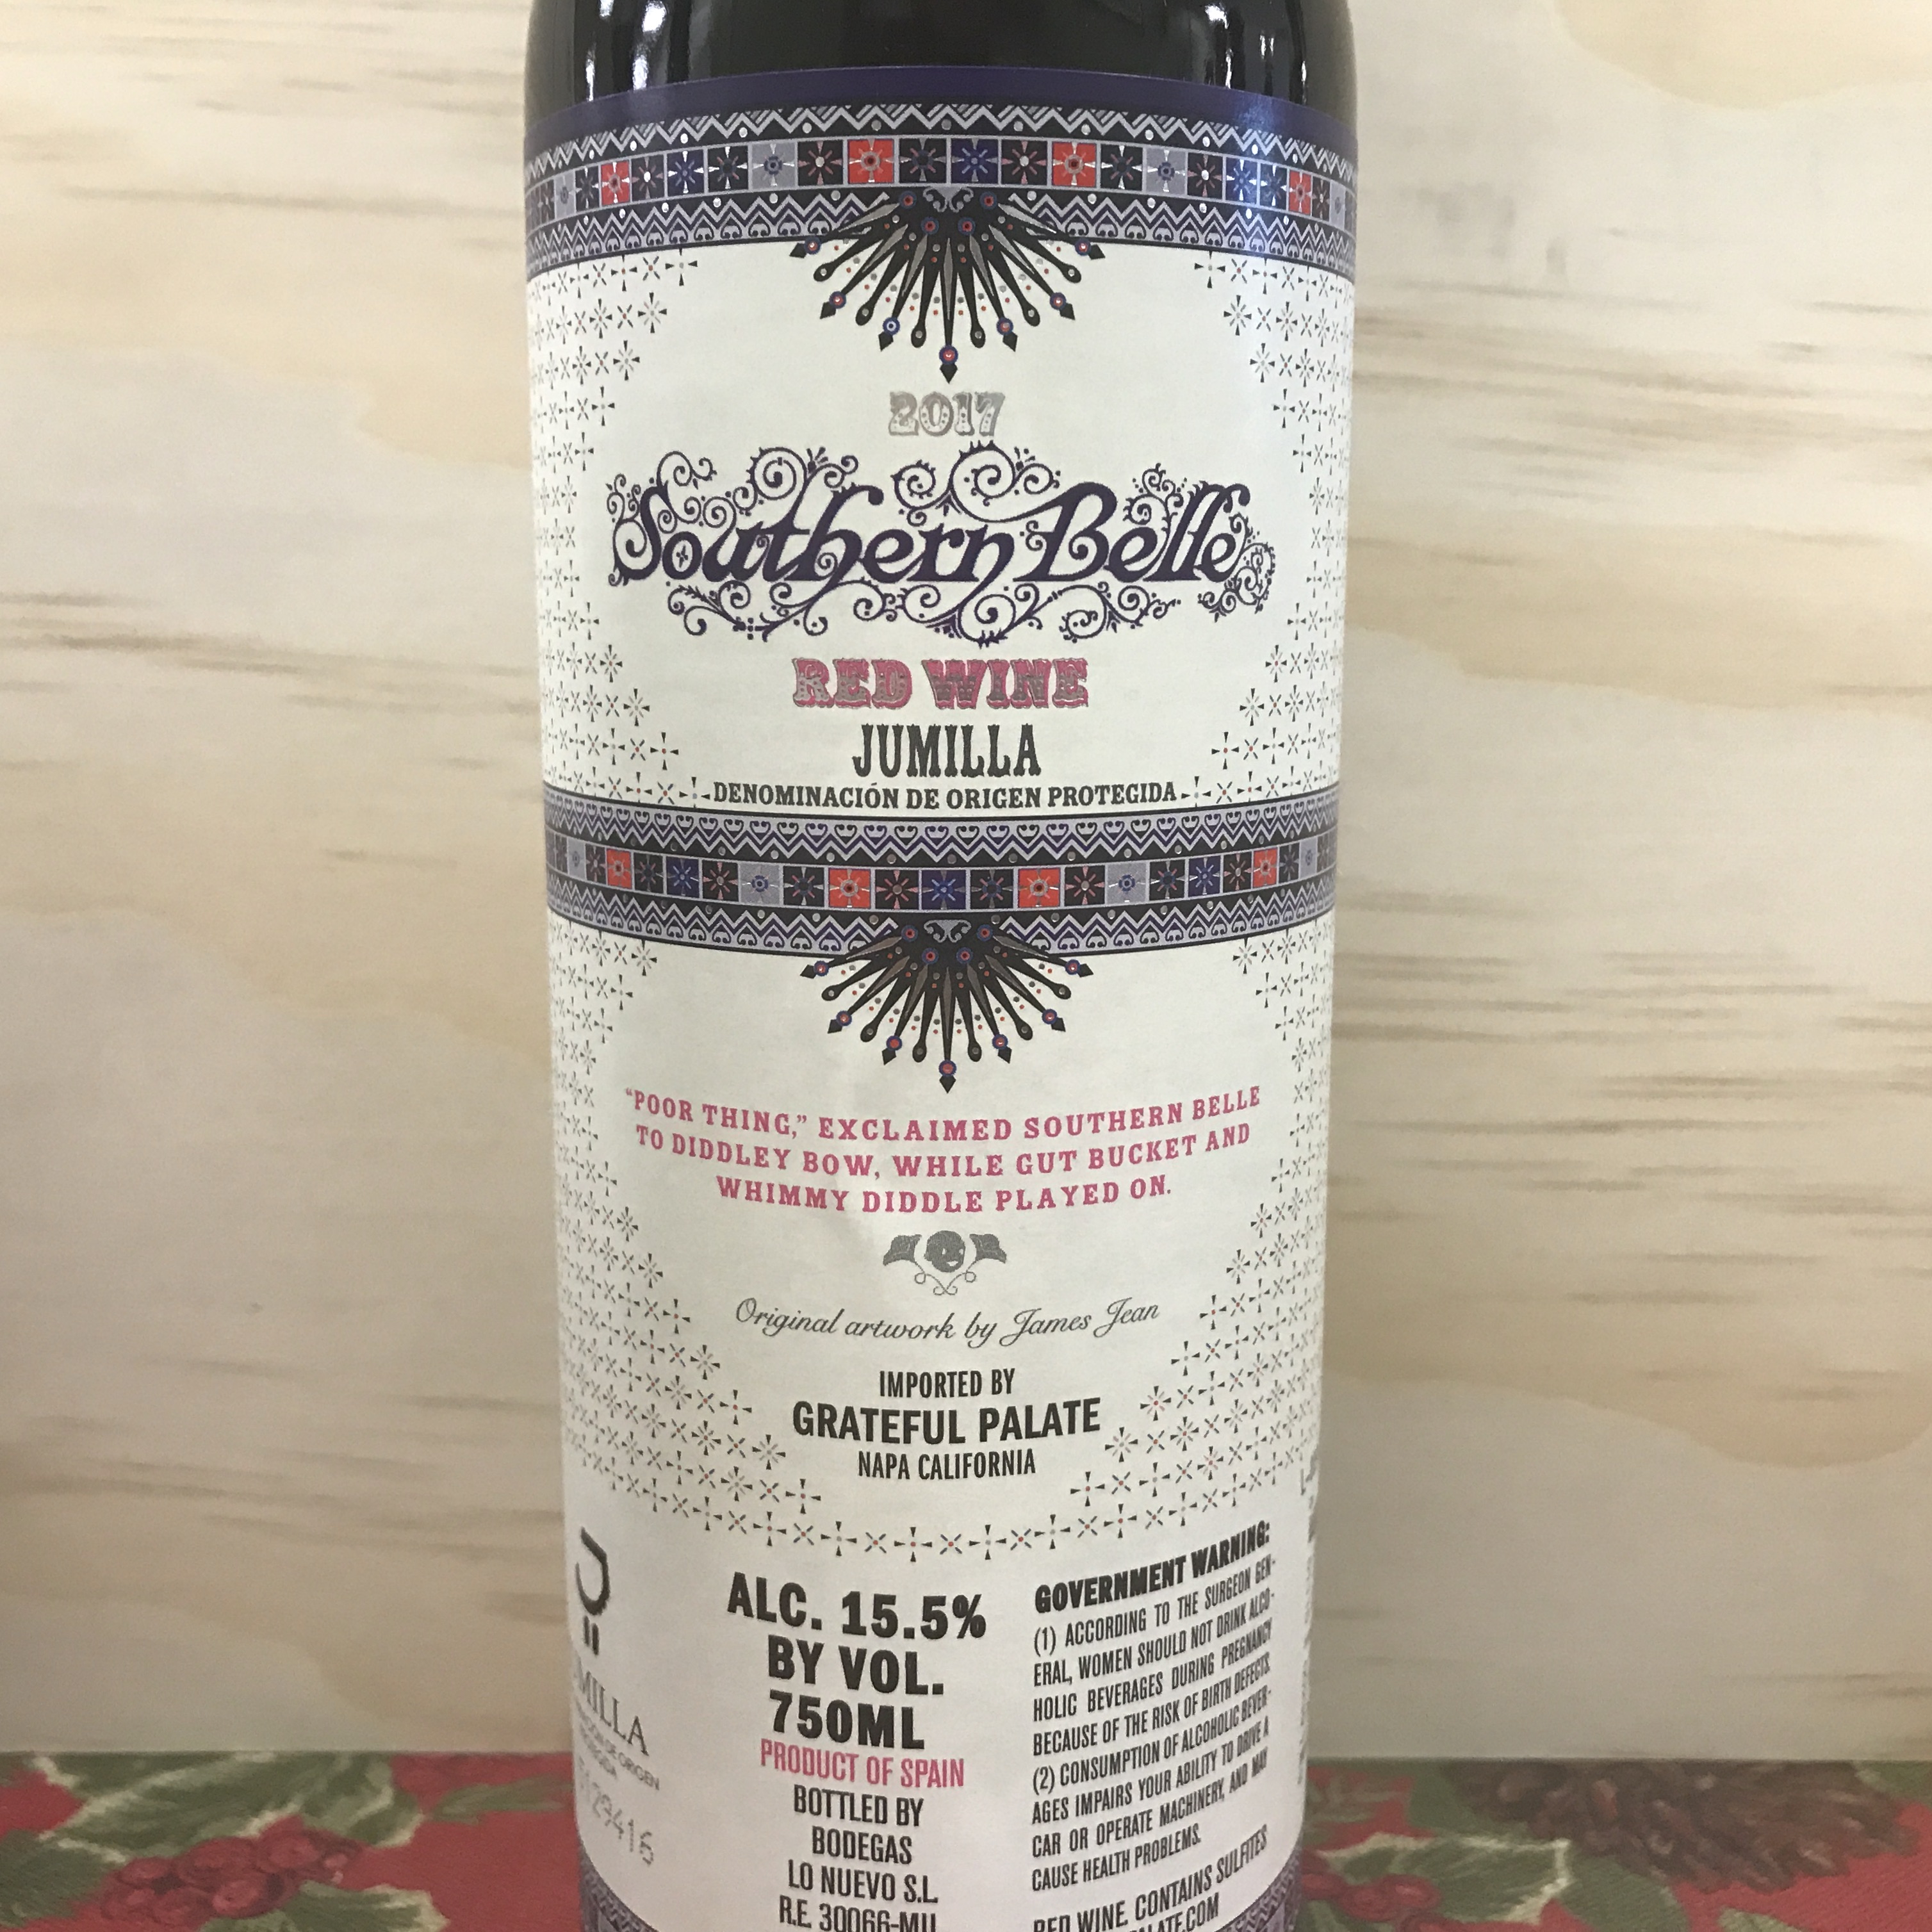 Southern Belle Red wine Jumilla 2016